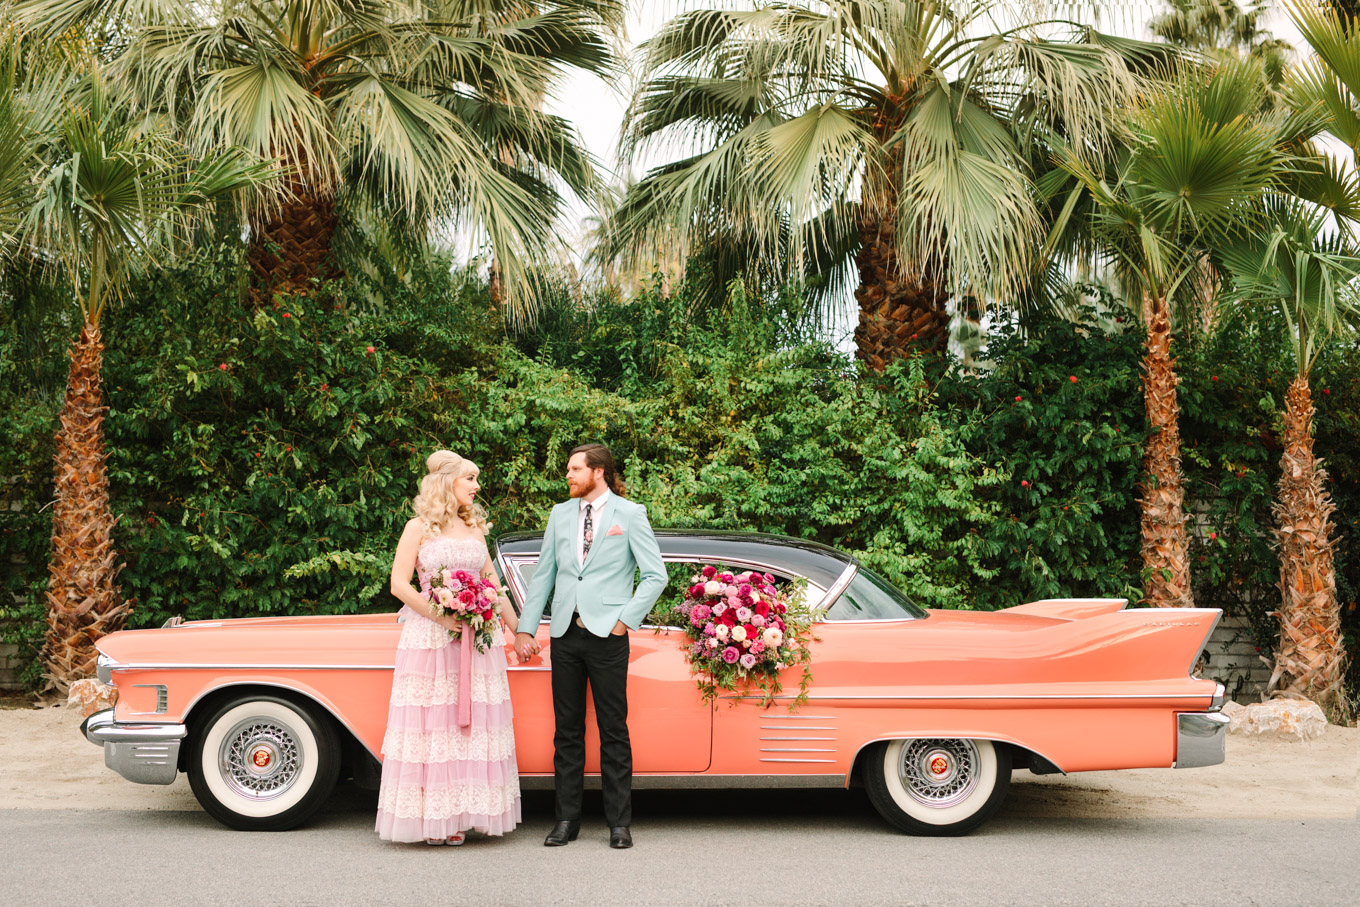 Exterior of Casa de Monte Vista. Modern vintage-inspired Palm Springs engagement session with a 1960s pink Cadillac, retro clothing, and flowers by Shindig Chic. | Colorful and elevated wedding inspiration for fun-loving couples in Southern California | #engagementsession #PalmSpringsengagement #vintageweddingdress #floralcar #pinkcar   Source: Mary Costa Photography | Los Angeles